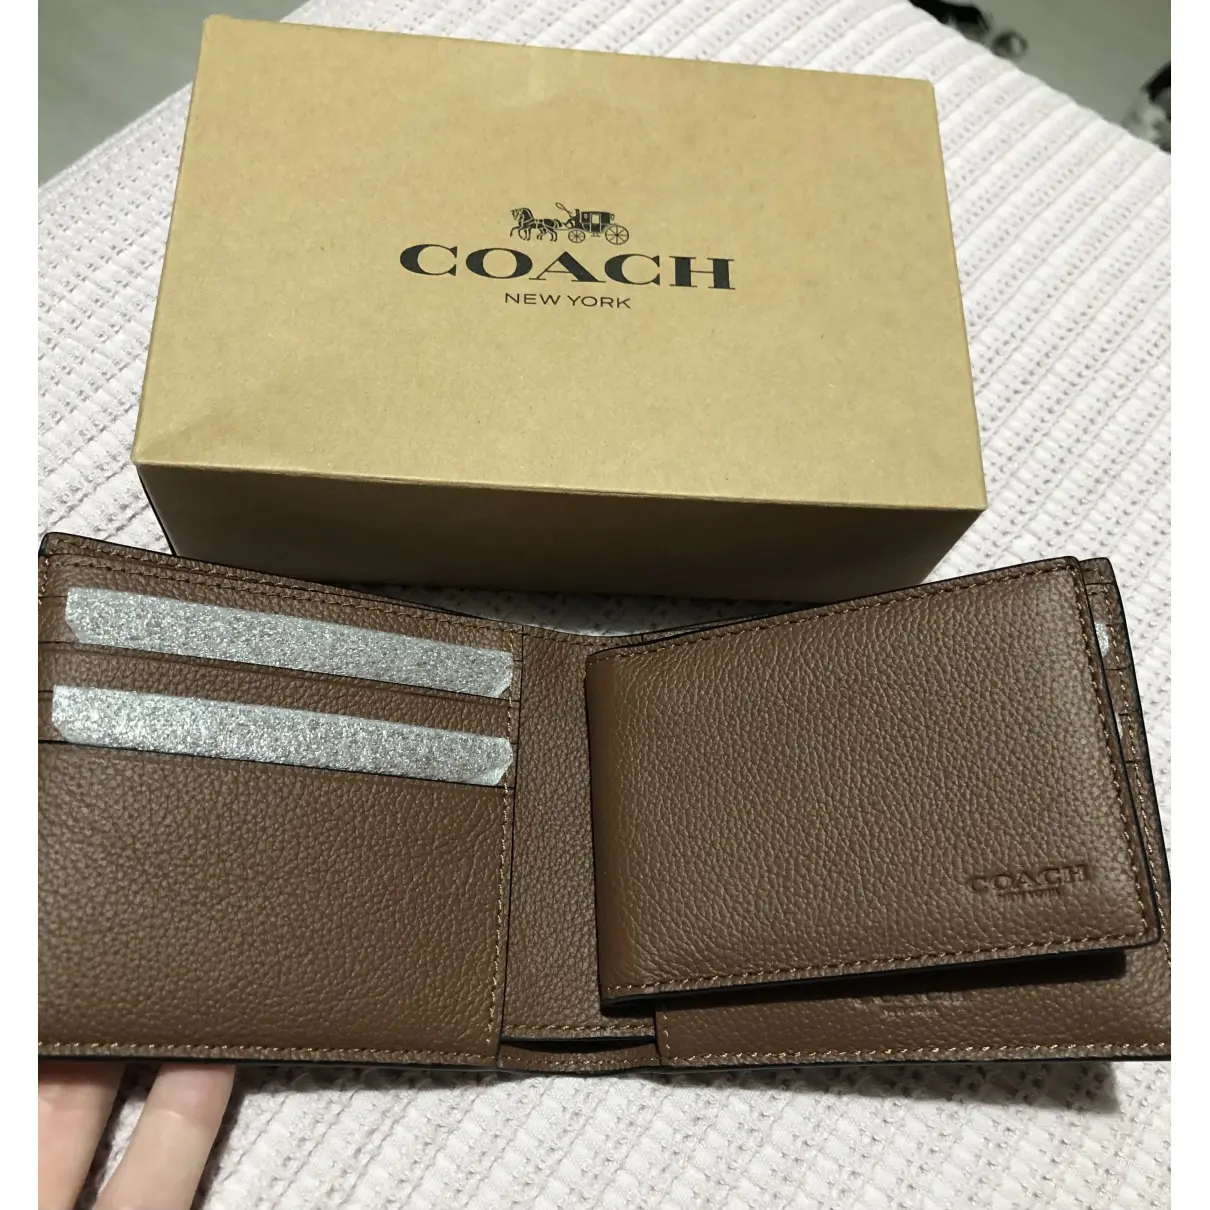 Buy Coach Vegan leather small bag online